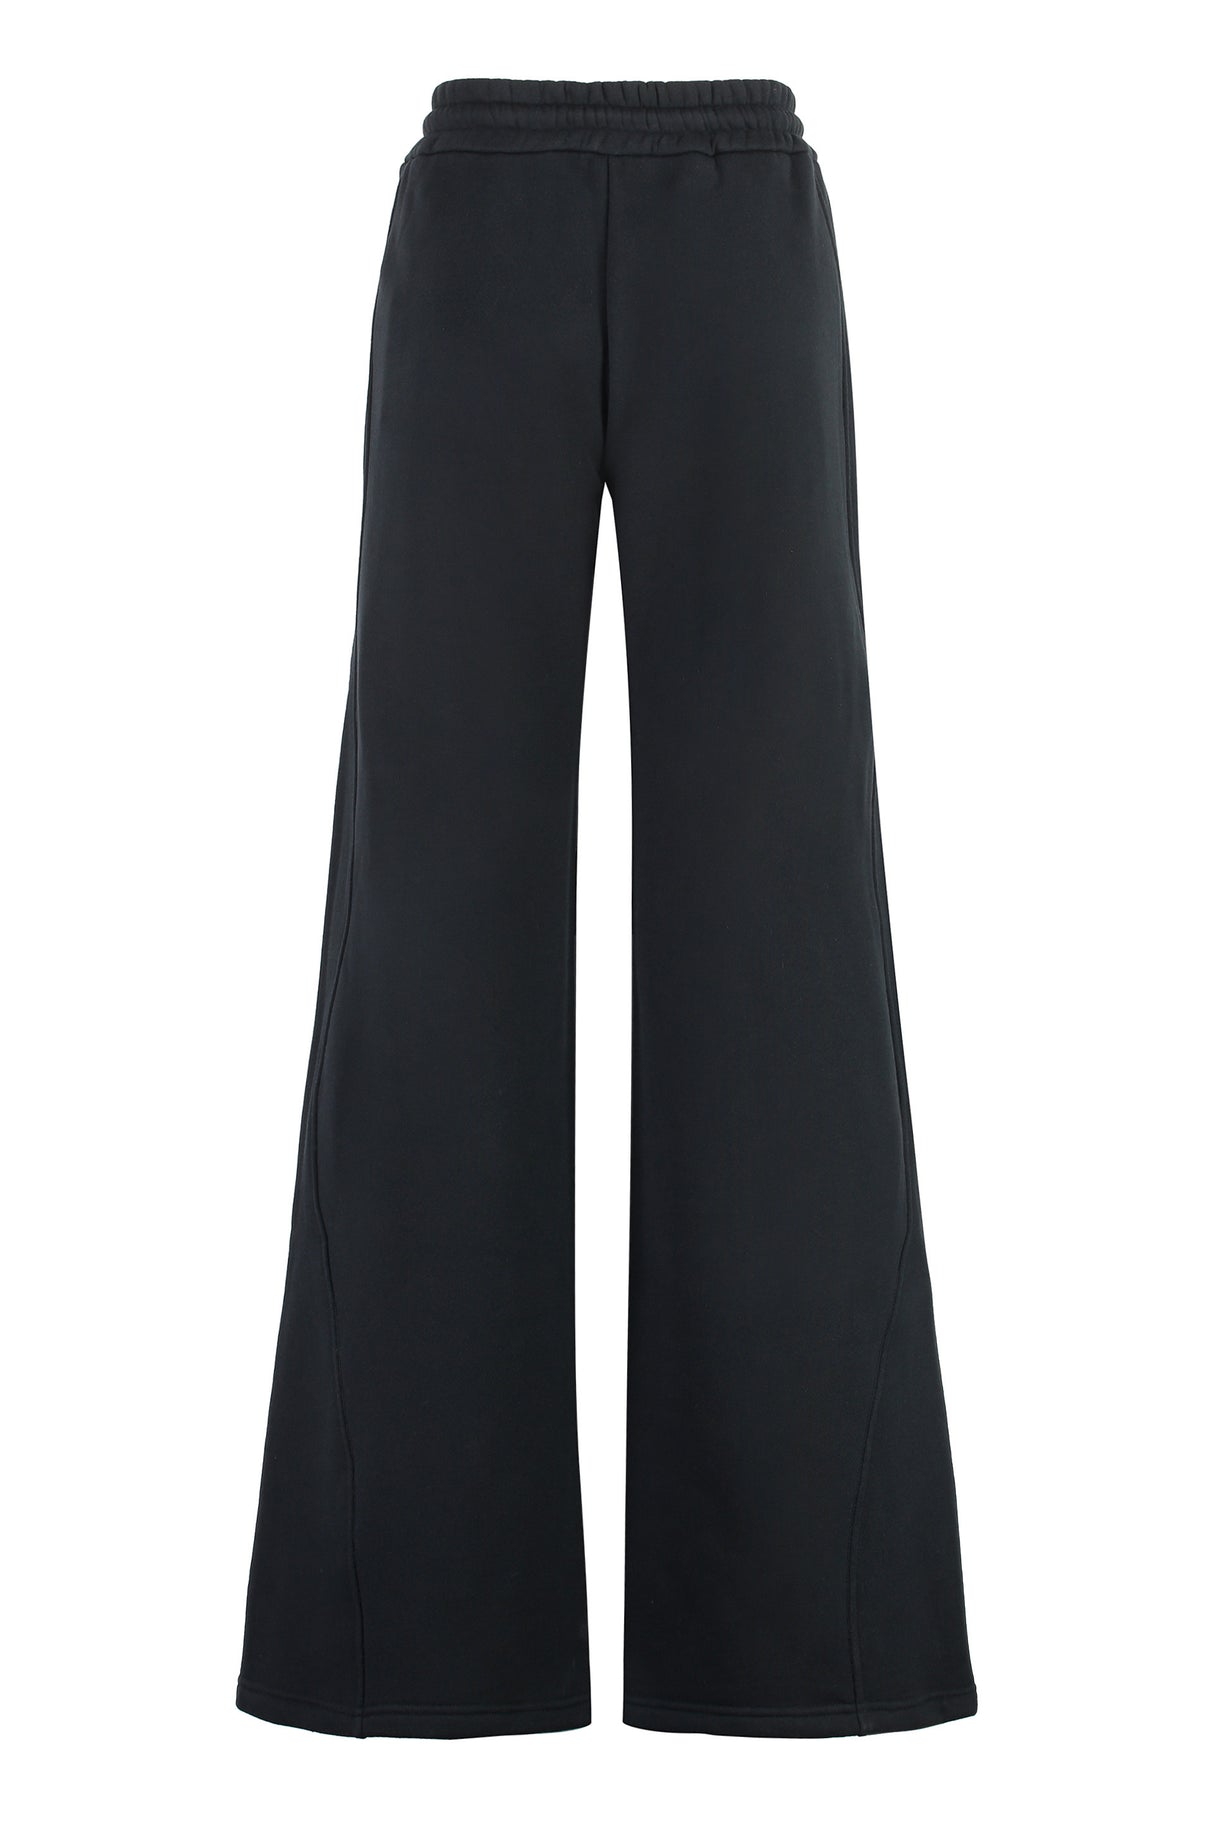 OFF-WHITE Black Cotton Trousers for Women - FW23 Collection